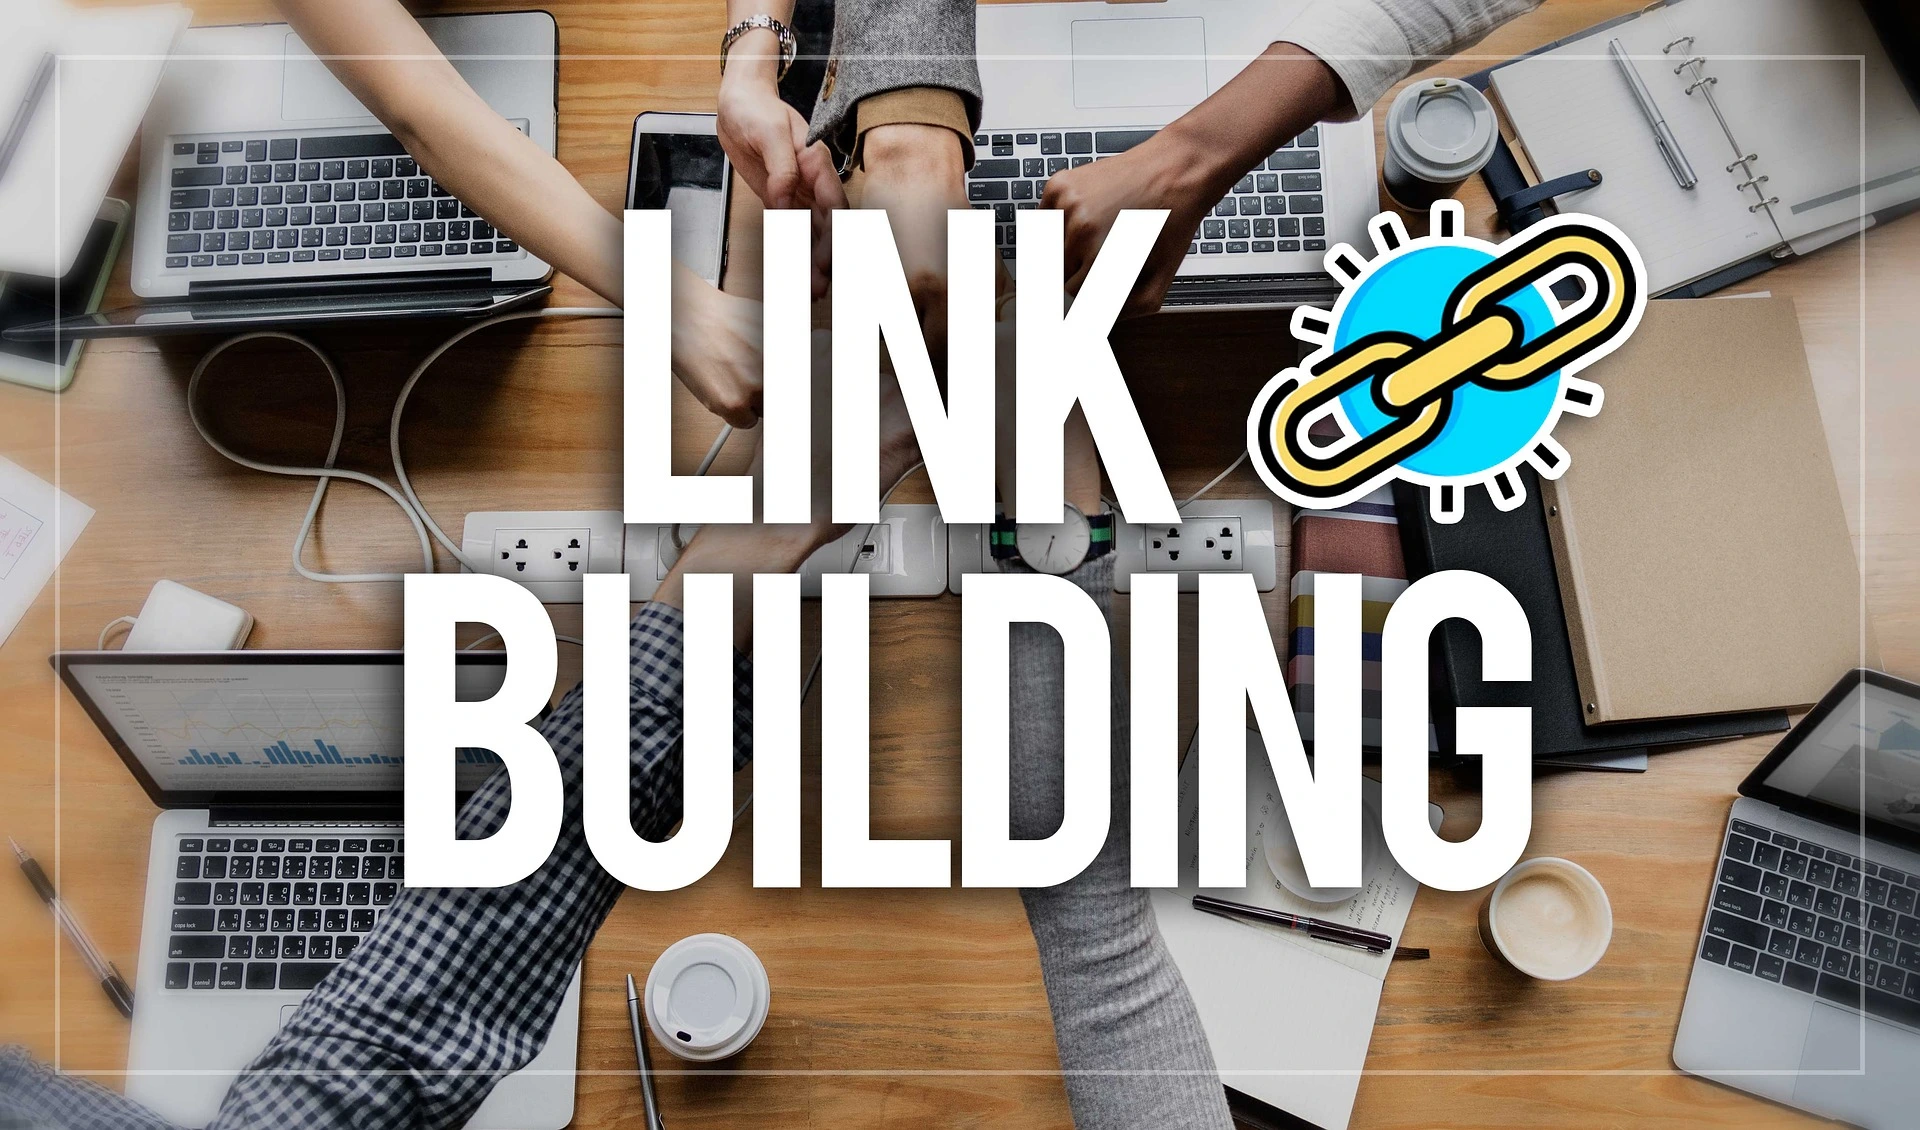 outsource link building